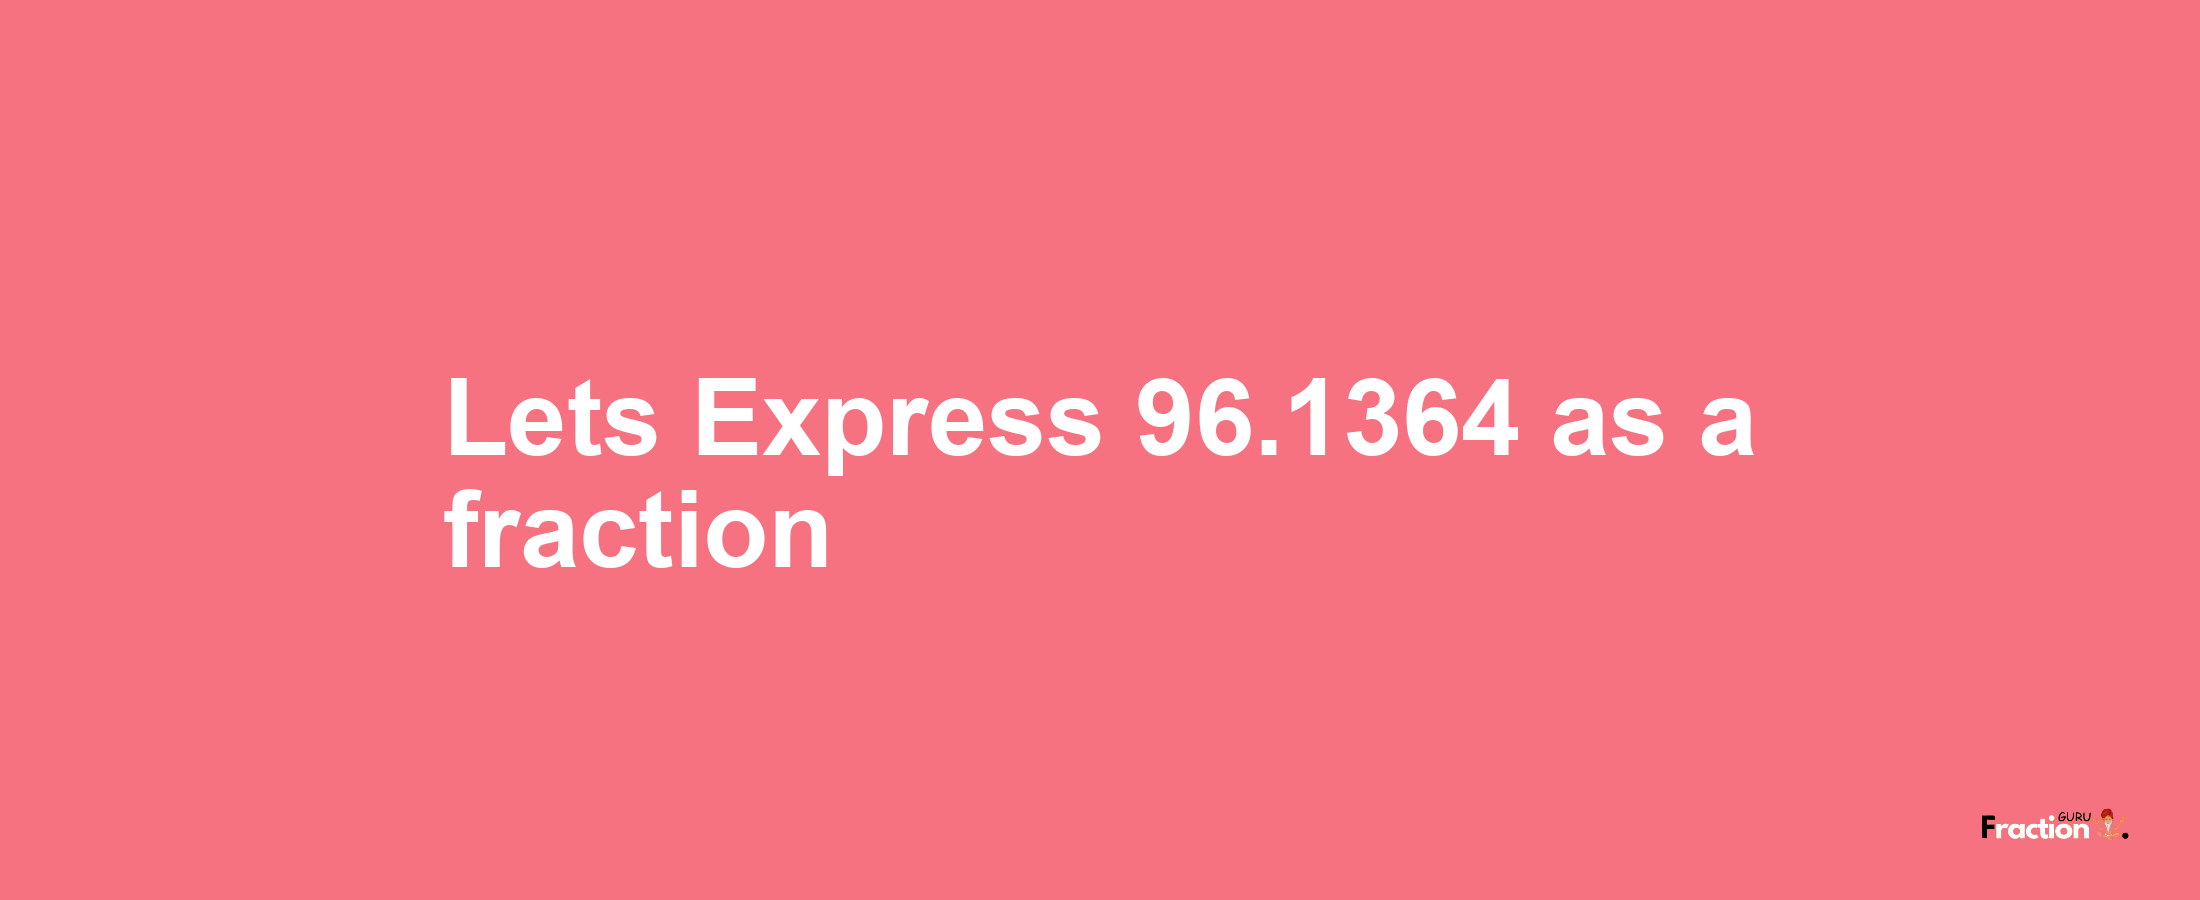 Lets Express 96.1364 as afraction